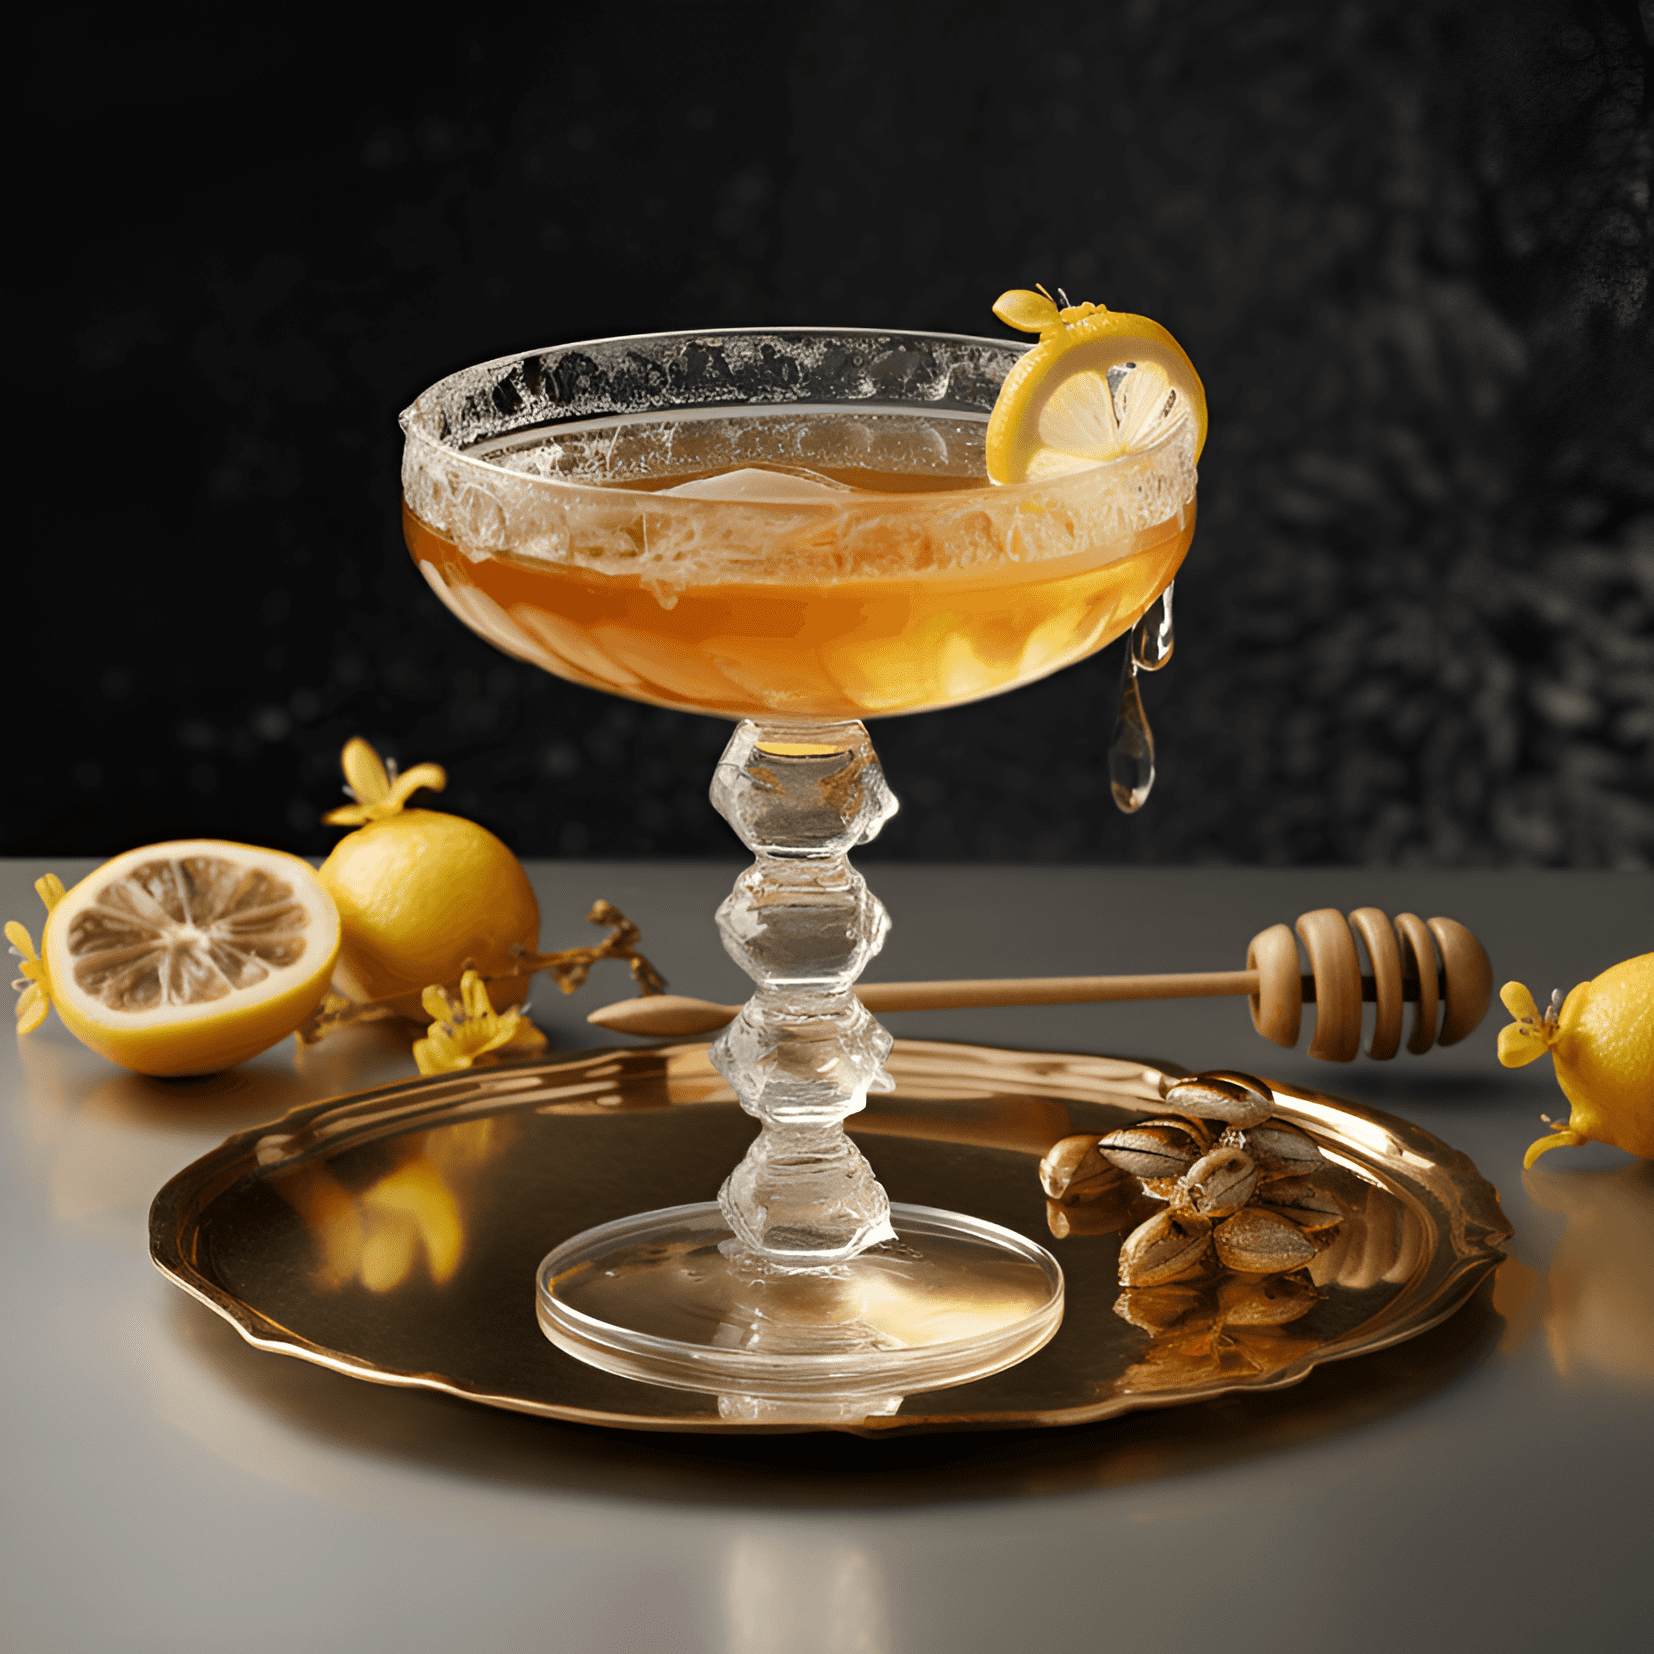 Queen Bee Cocktail Recipe - The Queen Bee cocktail is a harmonious blend of sweet, sour, and slightly floral flavors. The honey adds a rich sweetness, while the lemon provides a zesty tang. The gin contributes a subtle herbal note, and the sparkling wine adds a touch of effervescence and dryness.